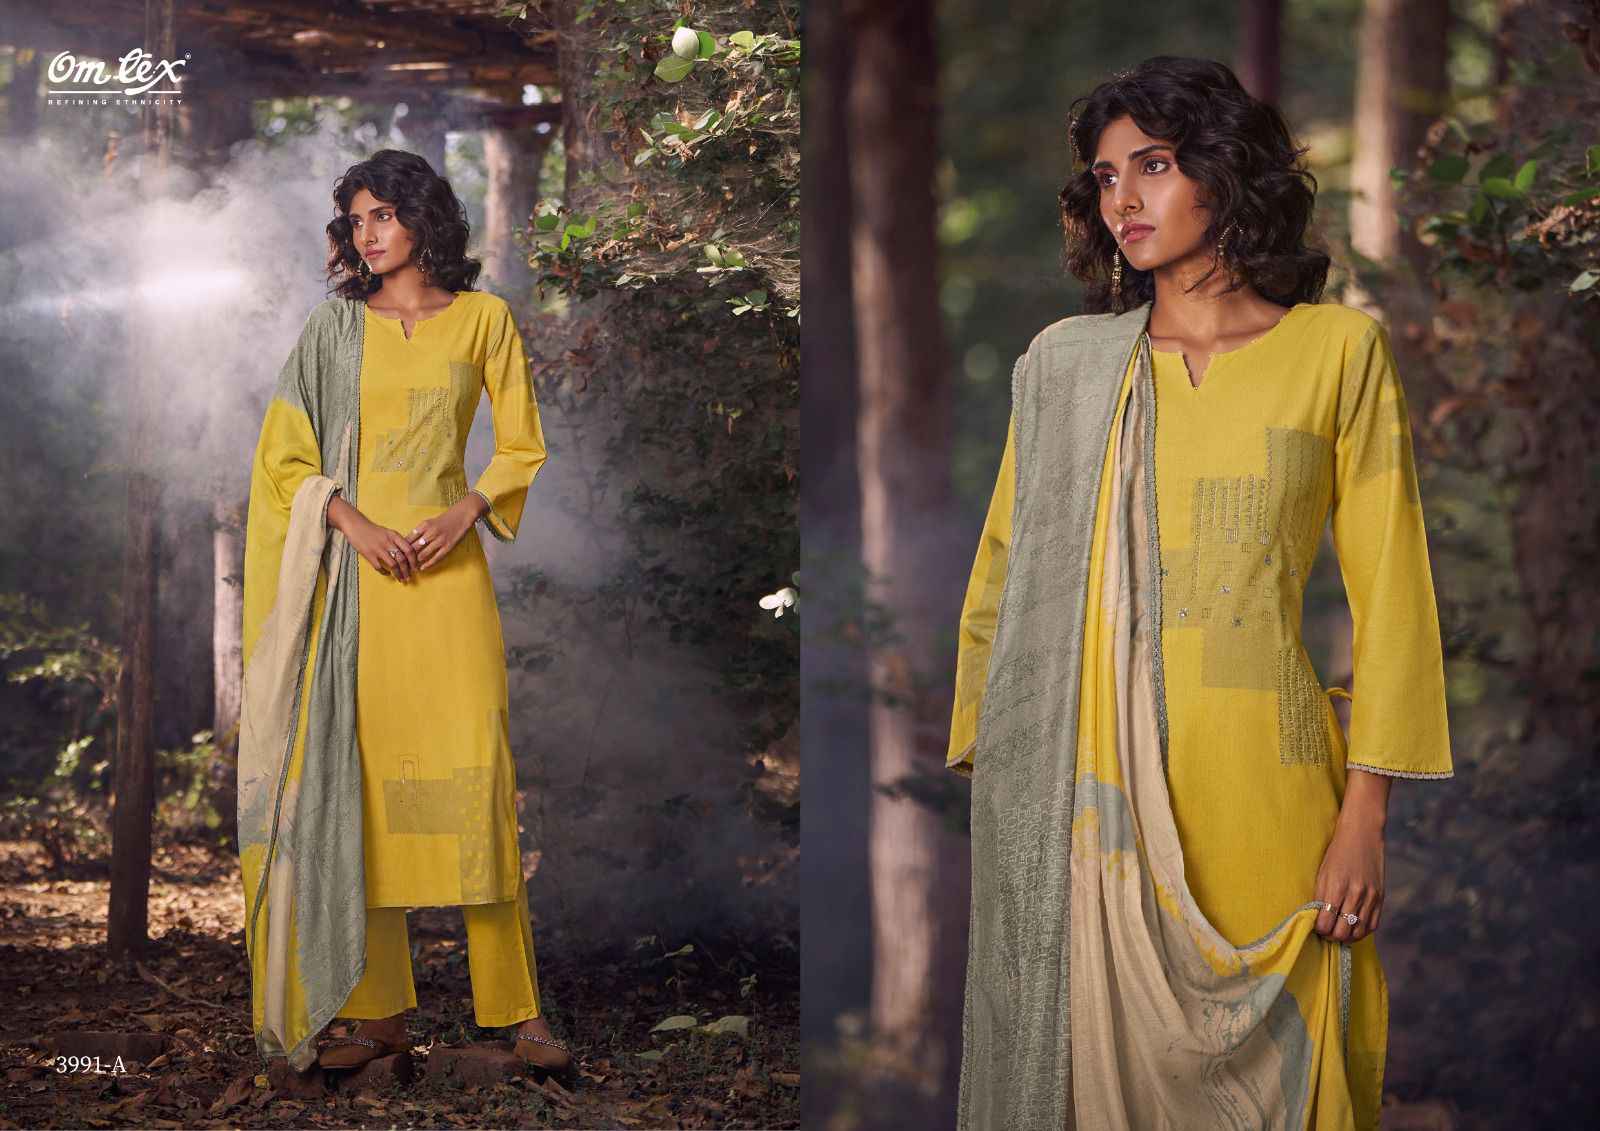 Omtex Mehaaki Lawn Cotton Dress Material (4 Pc Catalog)